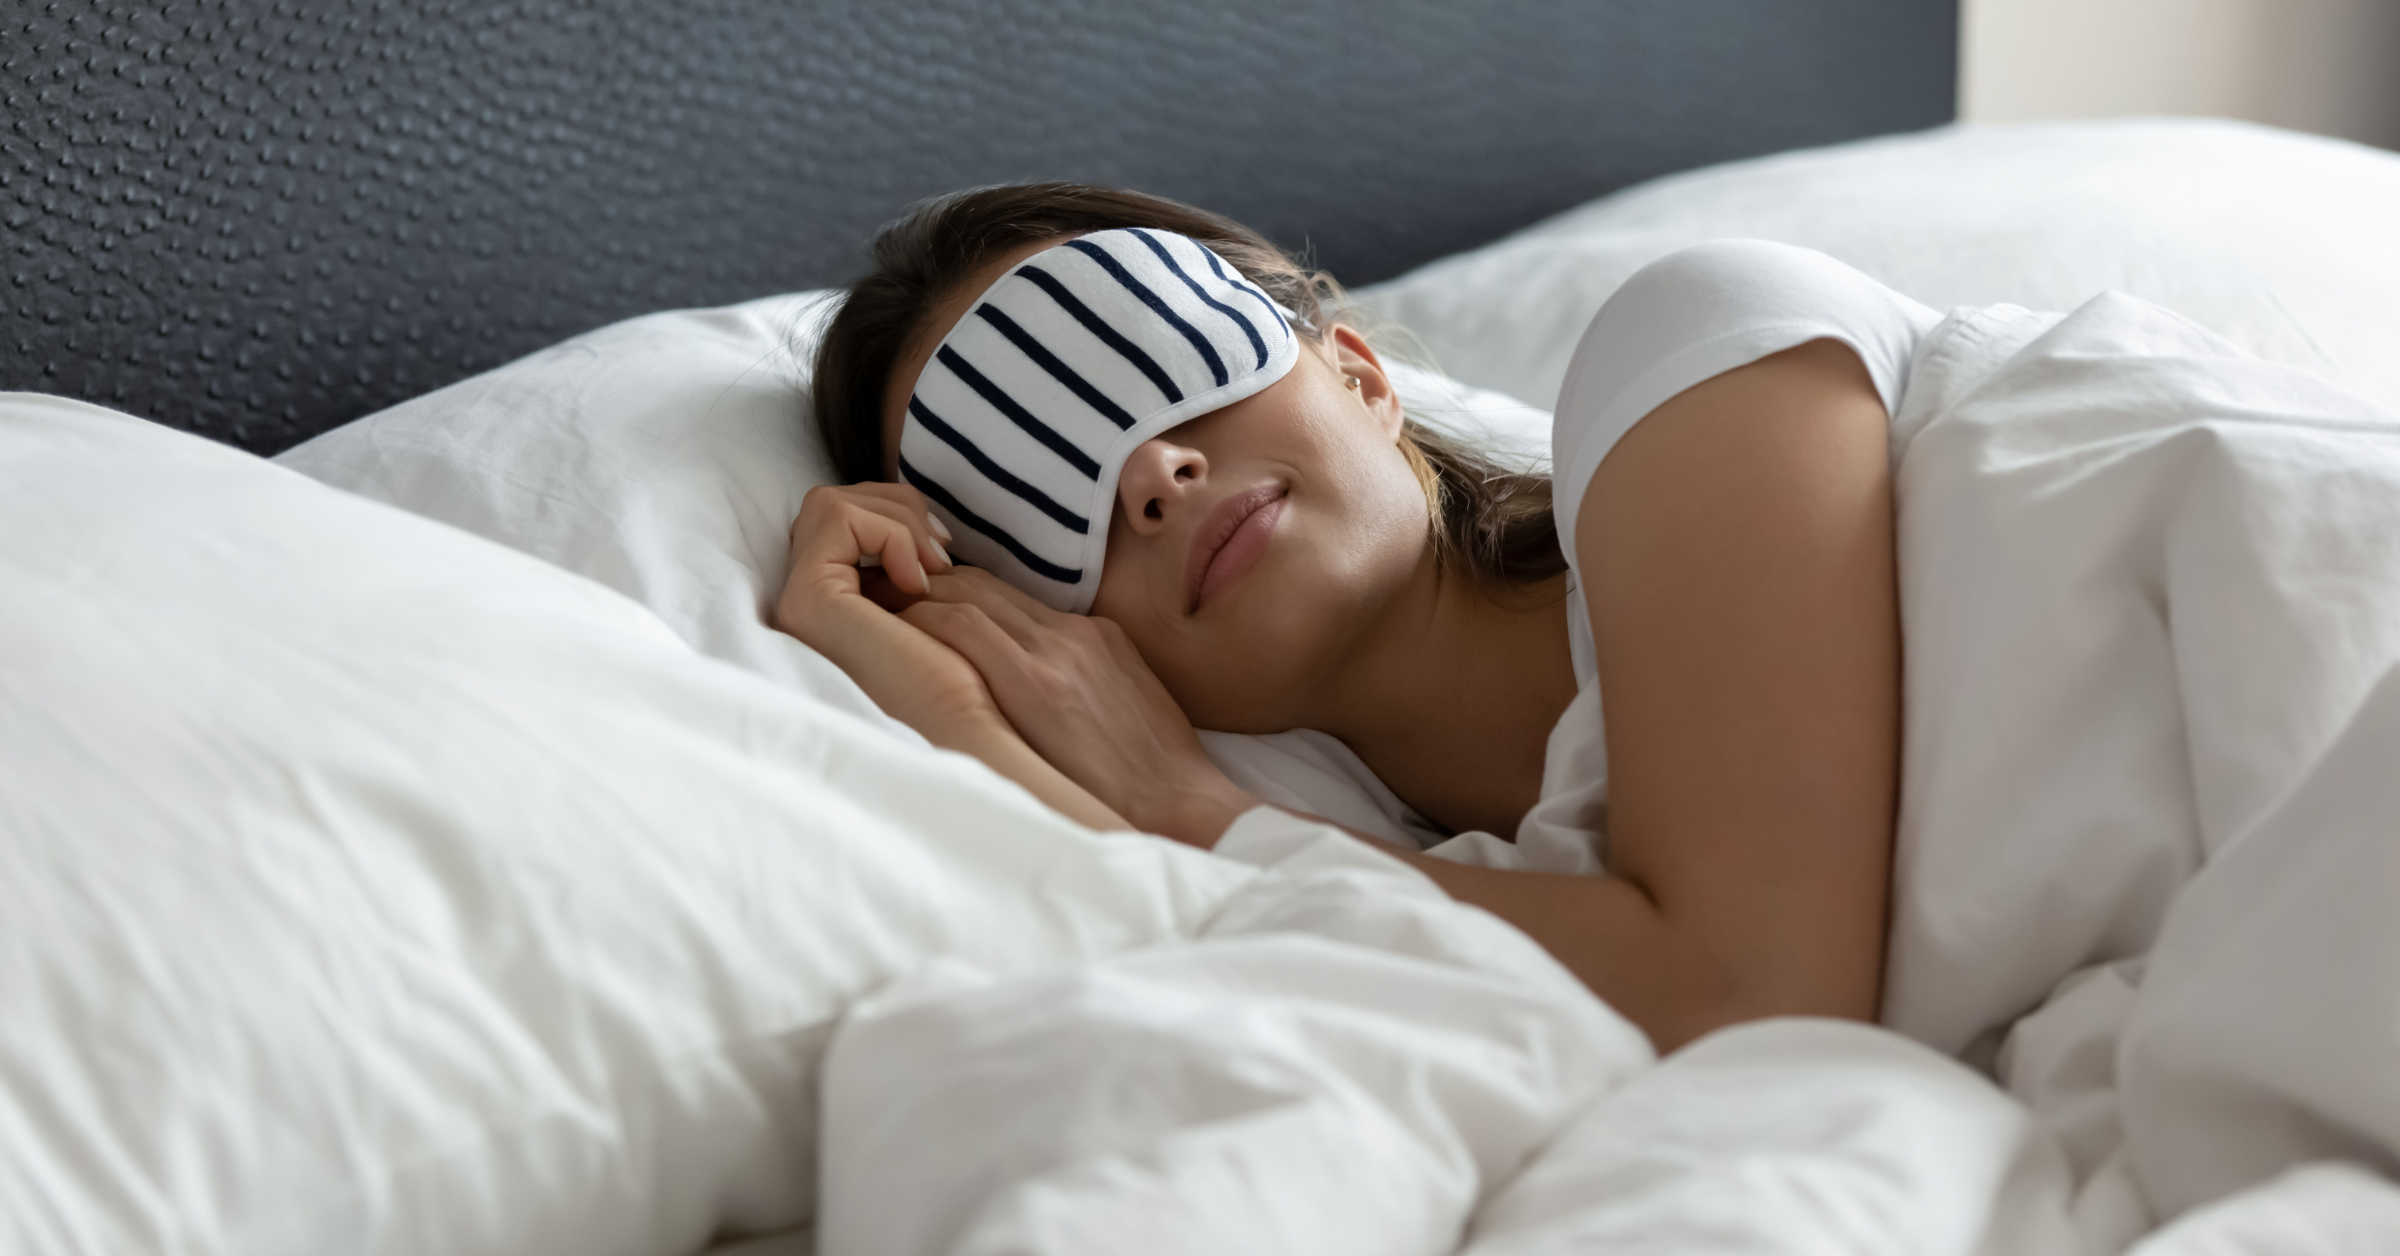 Learn all about sleep, how to improve your sleep and top nutrition tips